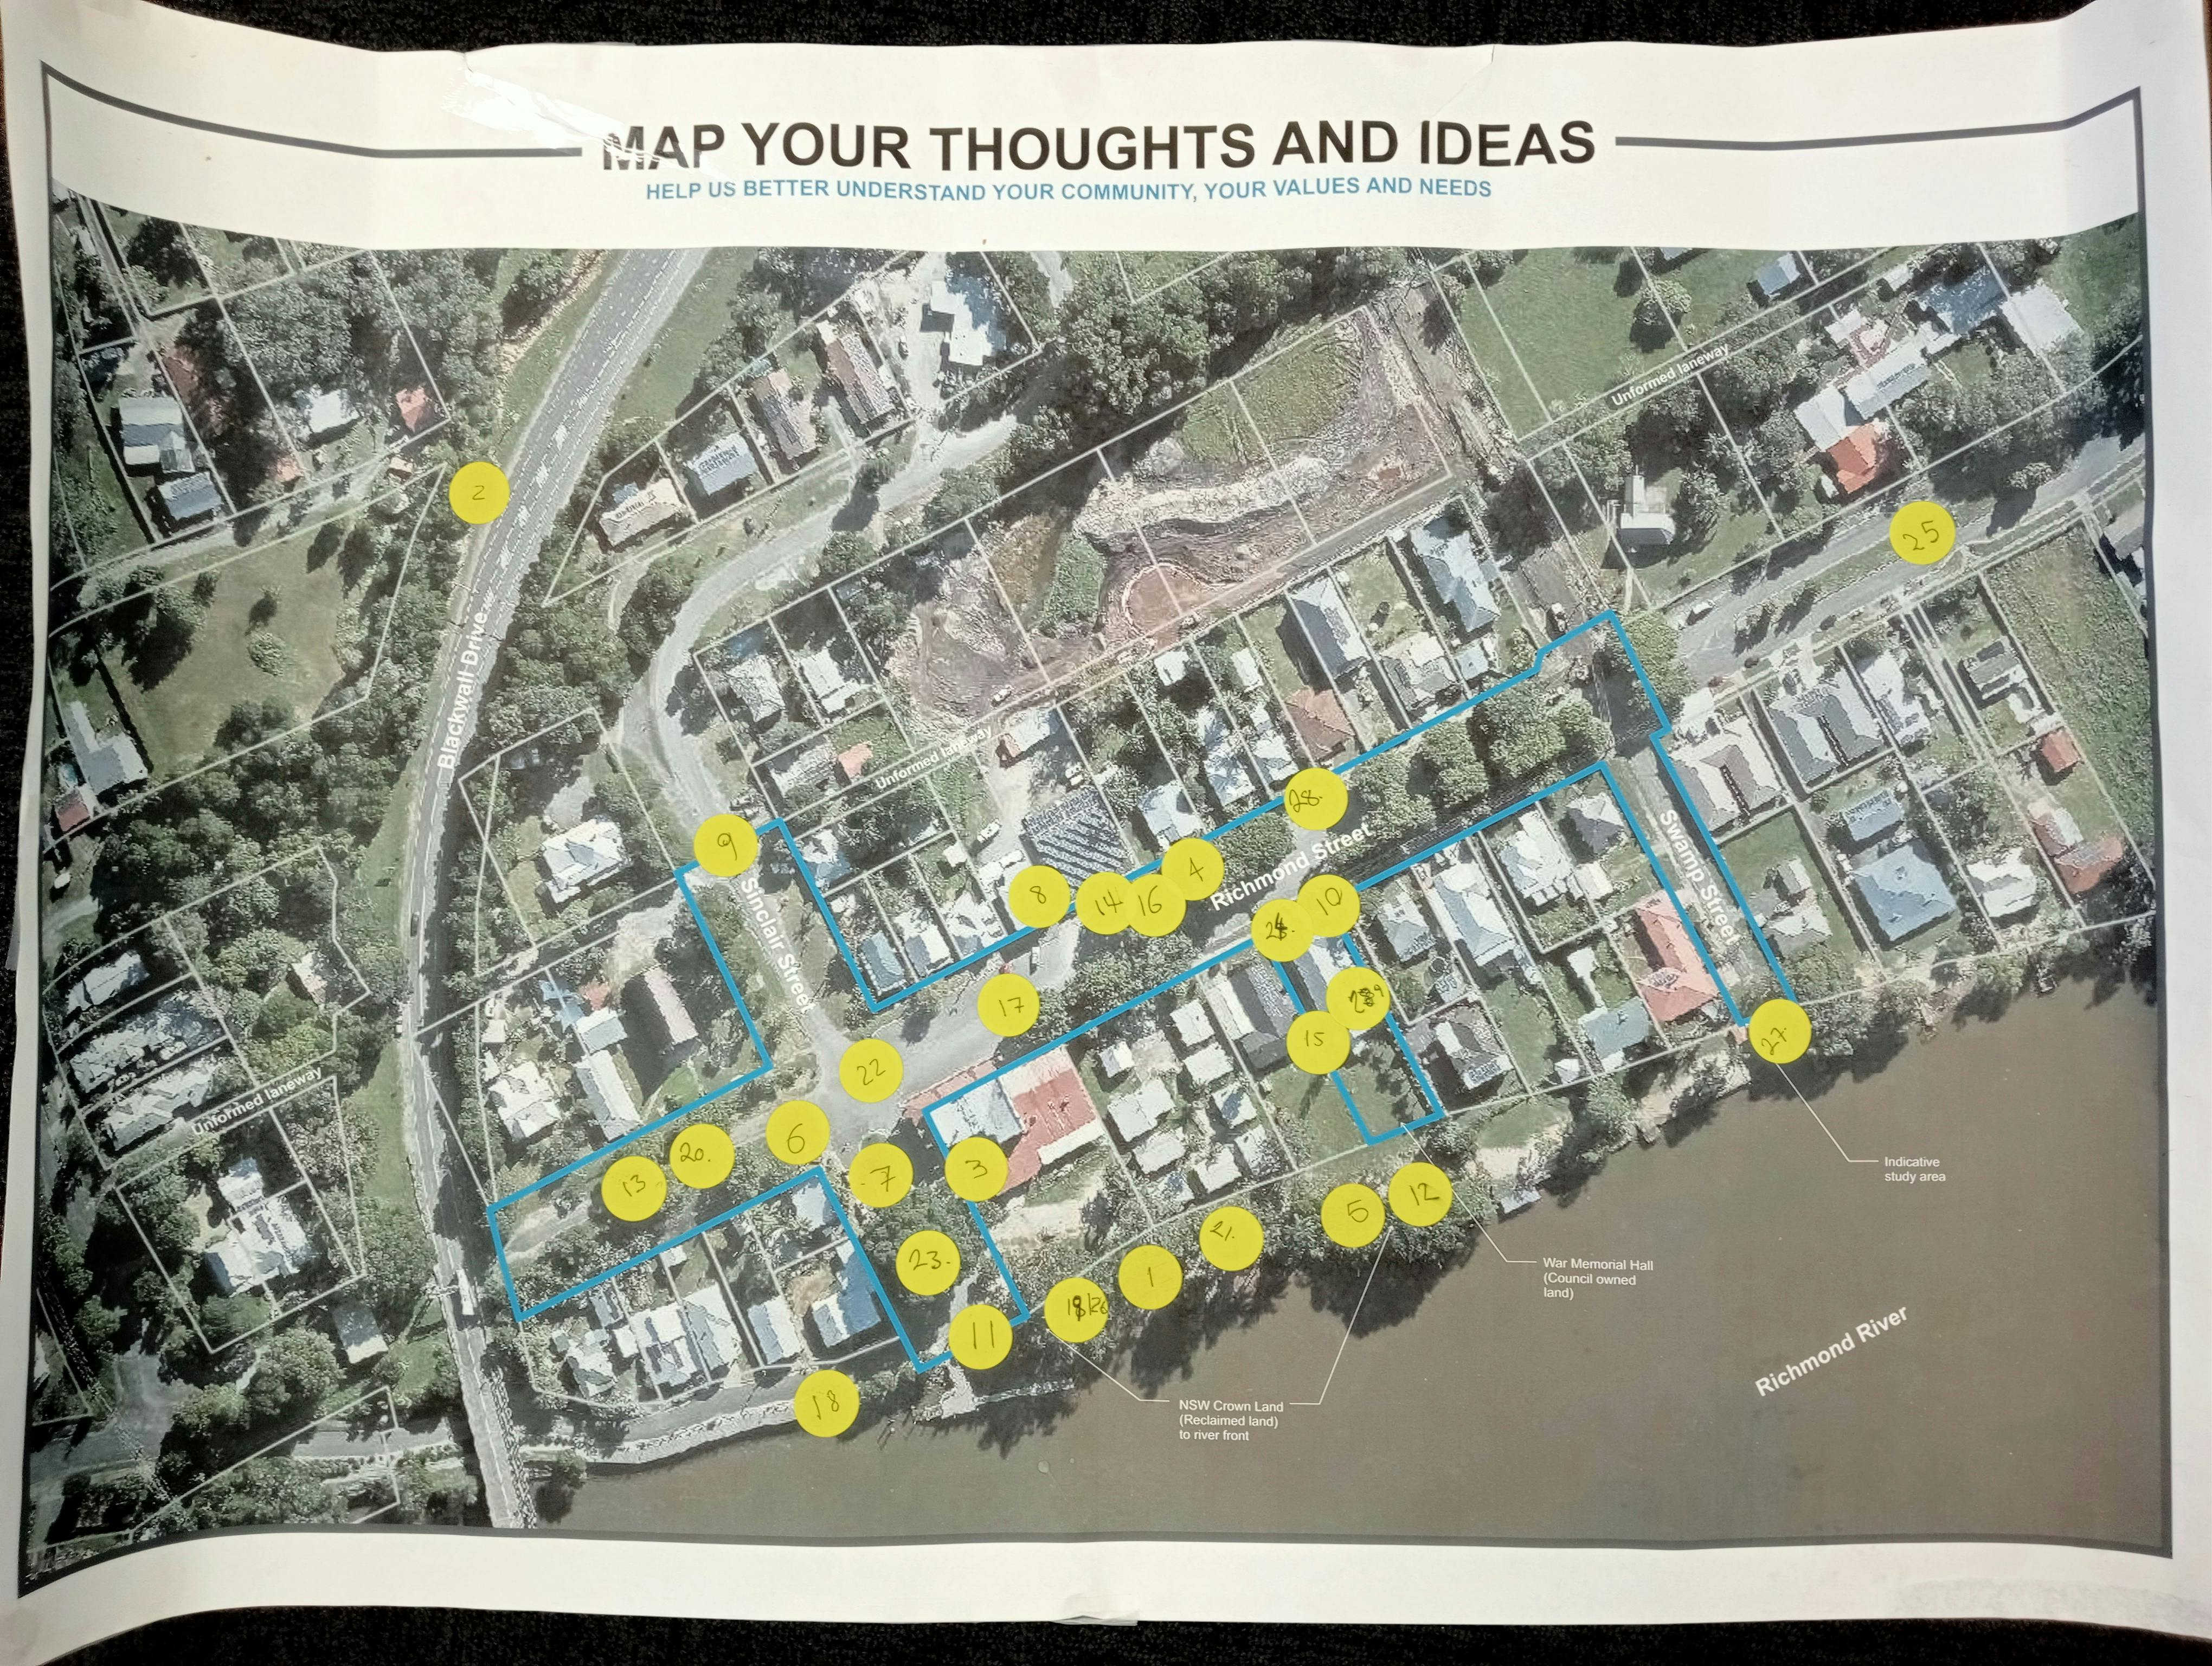 Thoughts and ideas mapped at community street stalls held November 2022